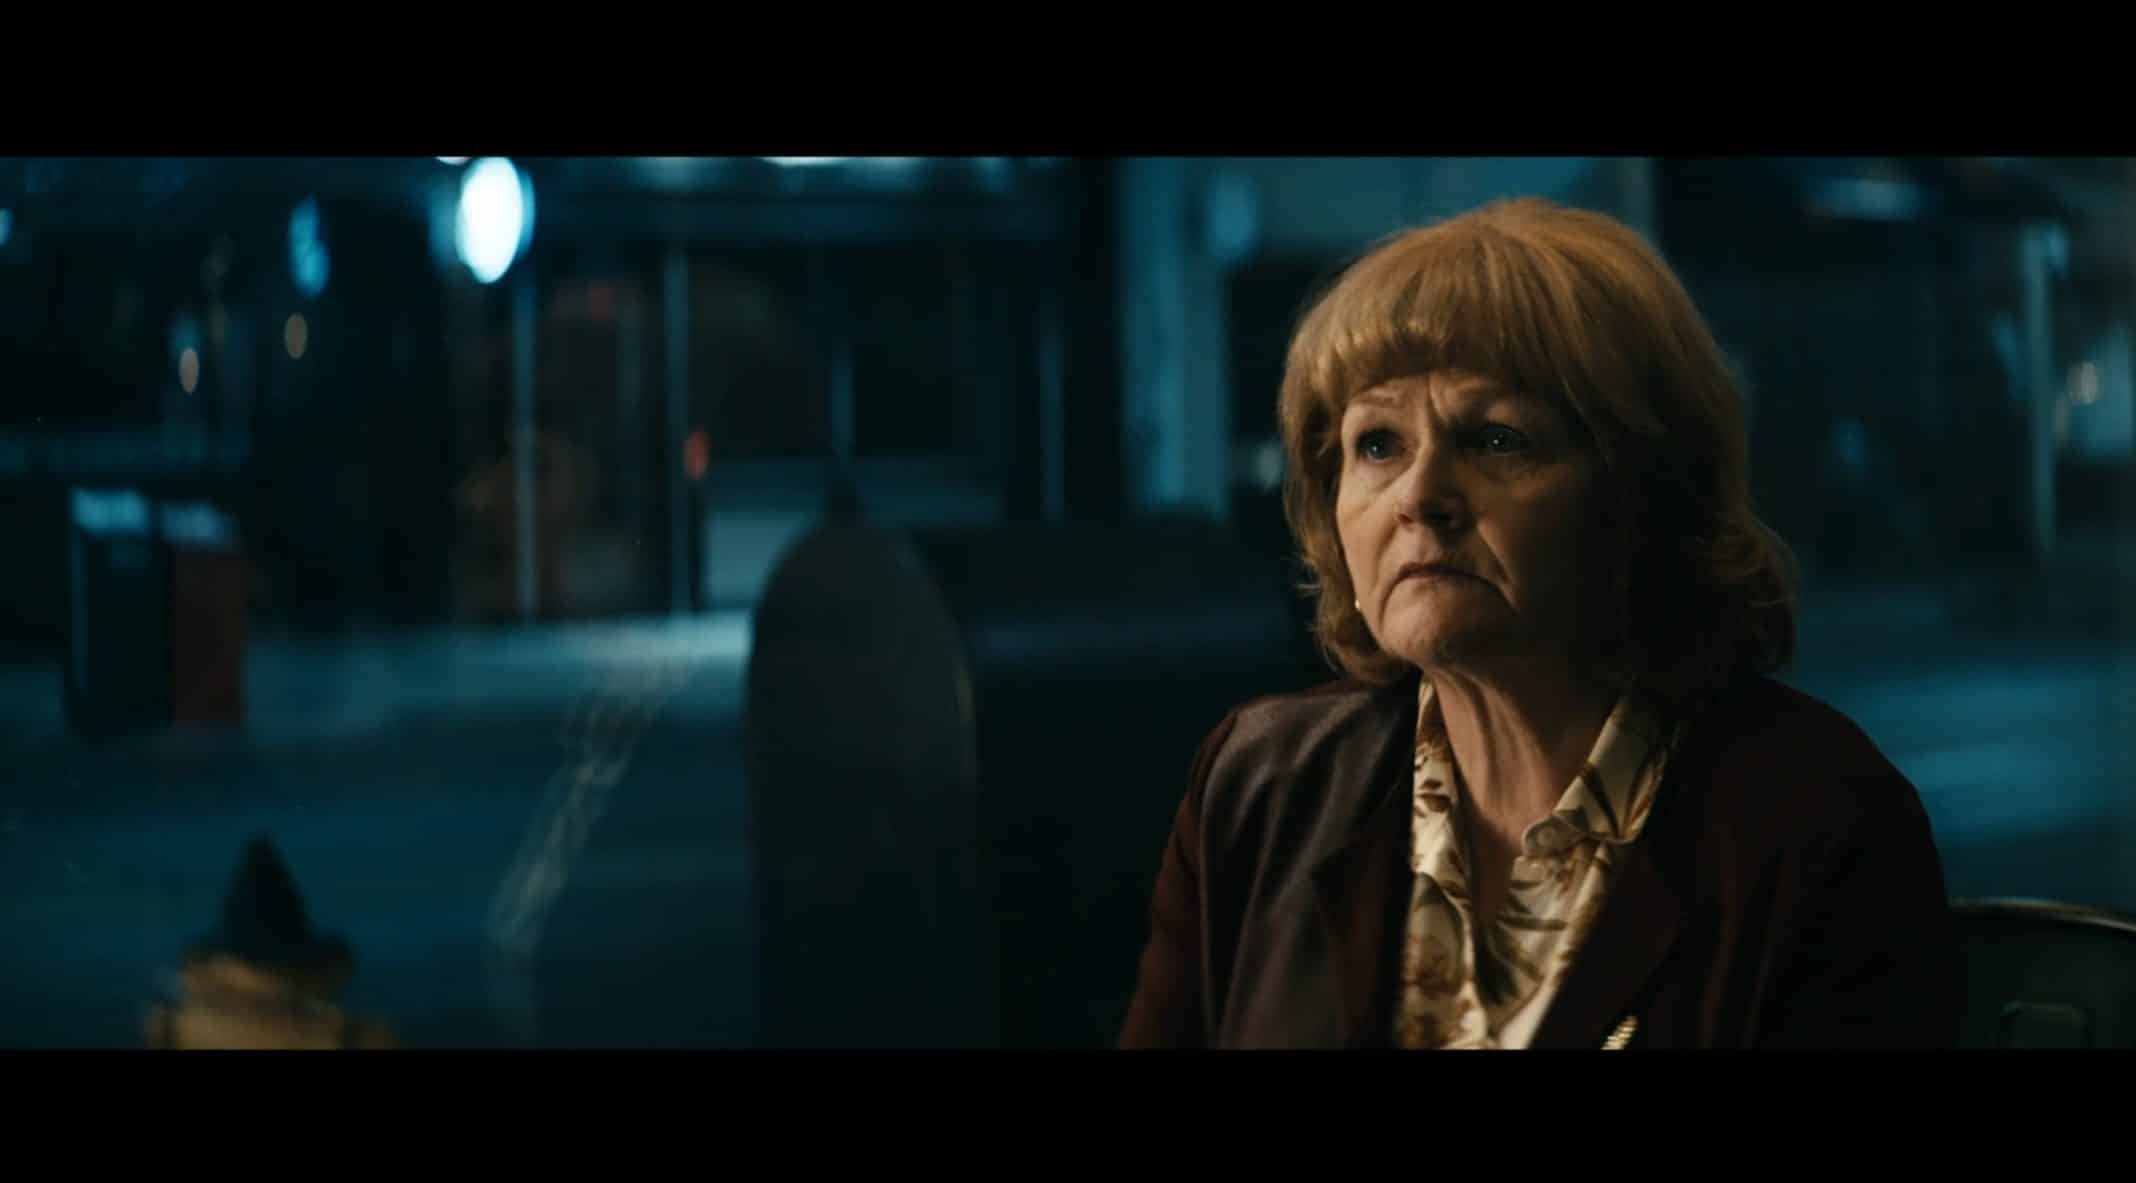 Connie (Lesley Nicol) in a diner with Billy.